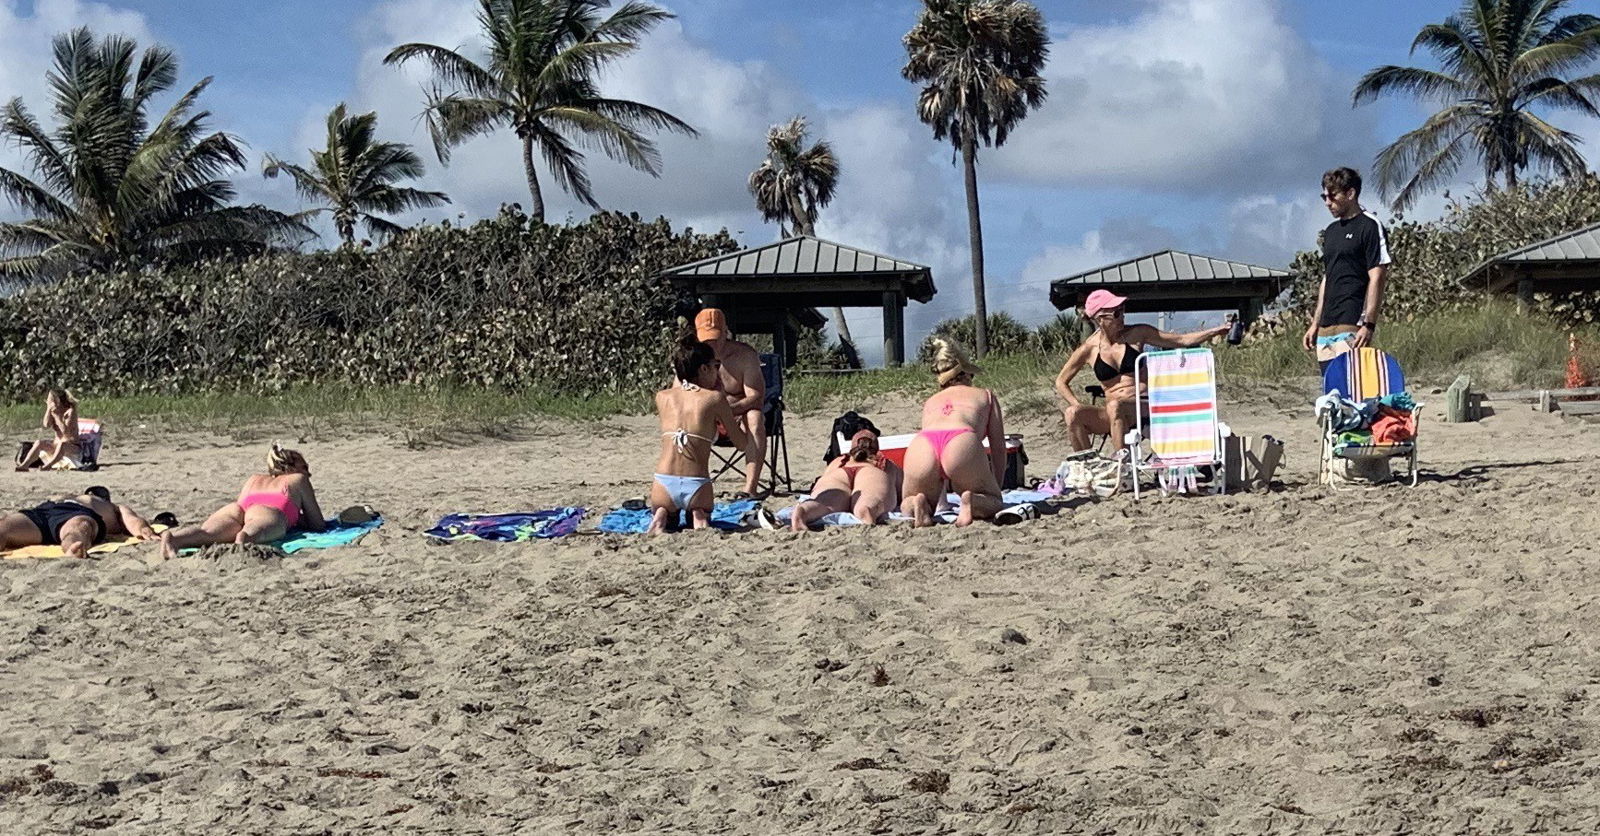 Photo by Creamsome with the username @Creamforall,  March 14, 2020 at 3:56 PM. The post is about the topic Voyeur and the text says 'Beach butts'